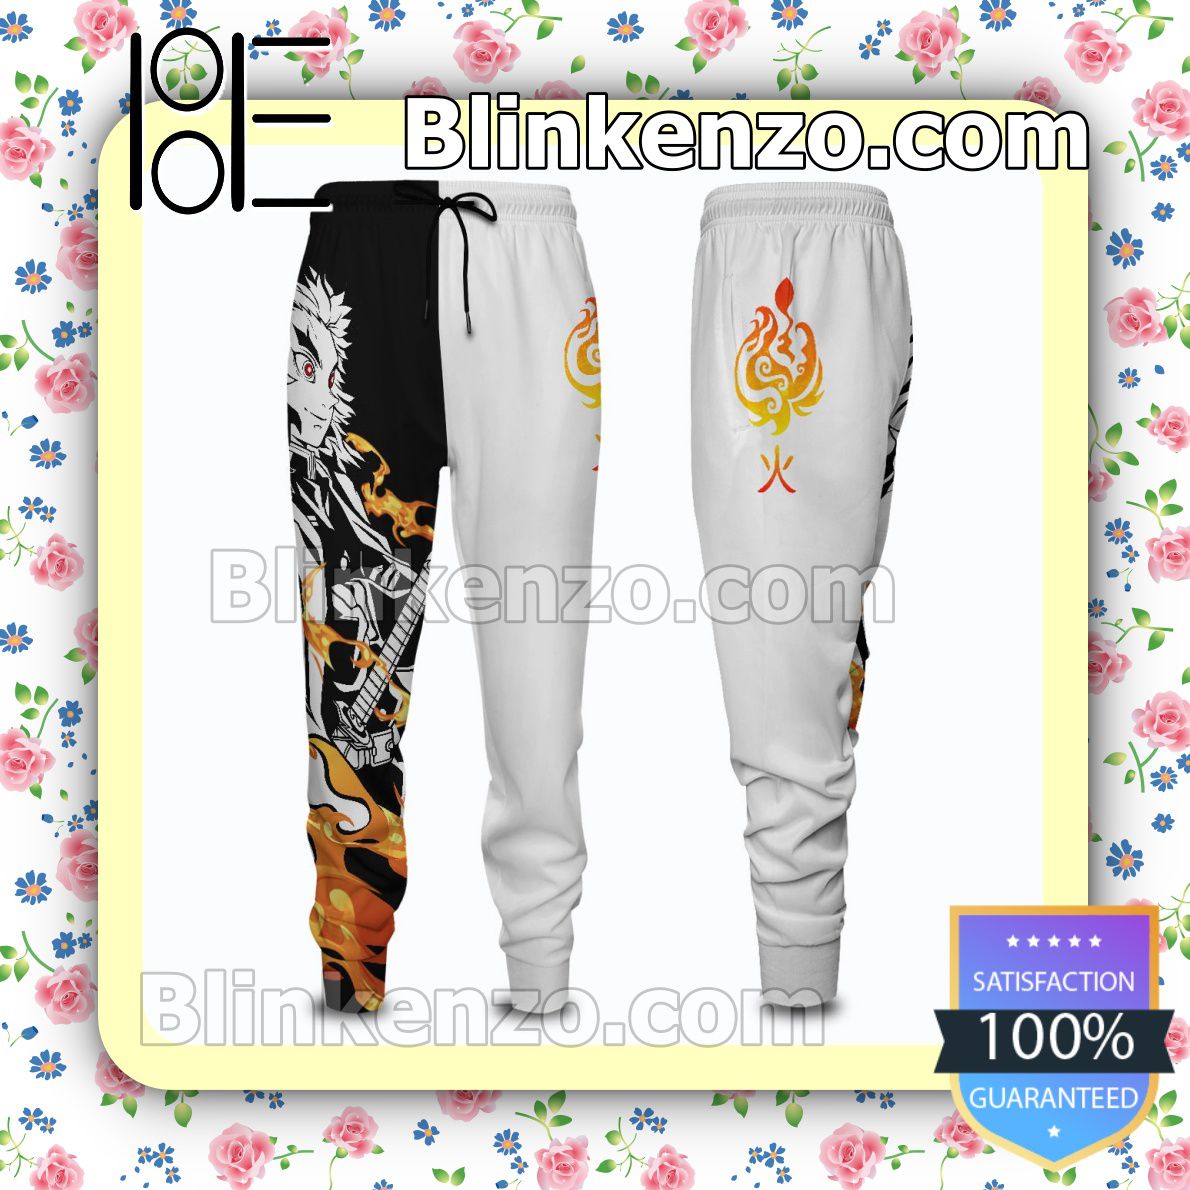 Absolutely Love Anime Rengoku Kyojuro Cool Demon Slayer Black And White Gift For Family Joggers